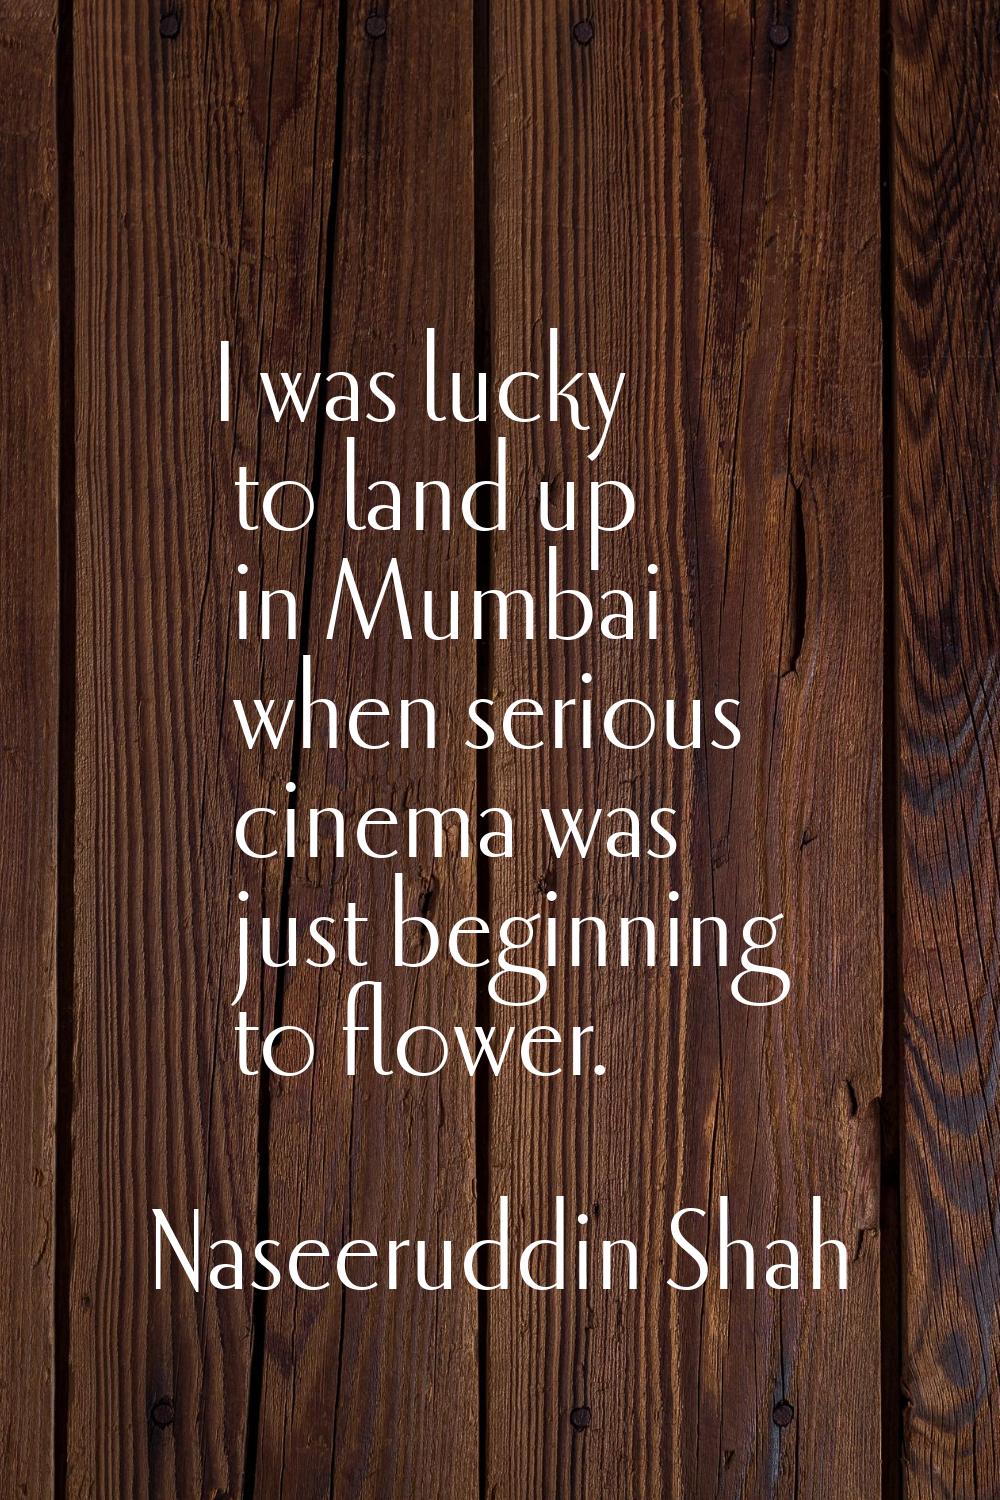 I was lucky to land up in Mumbai when serious cinema was just beginning to flower.